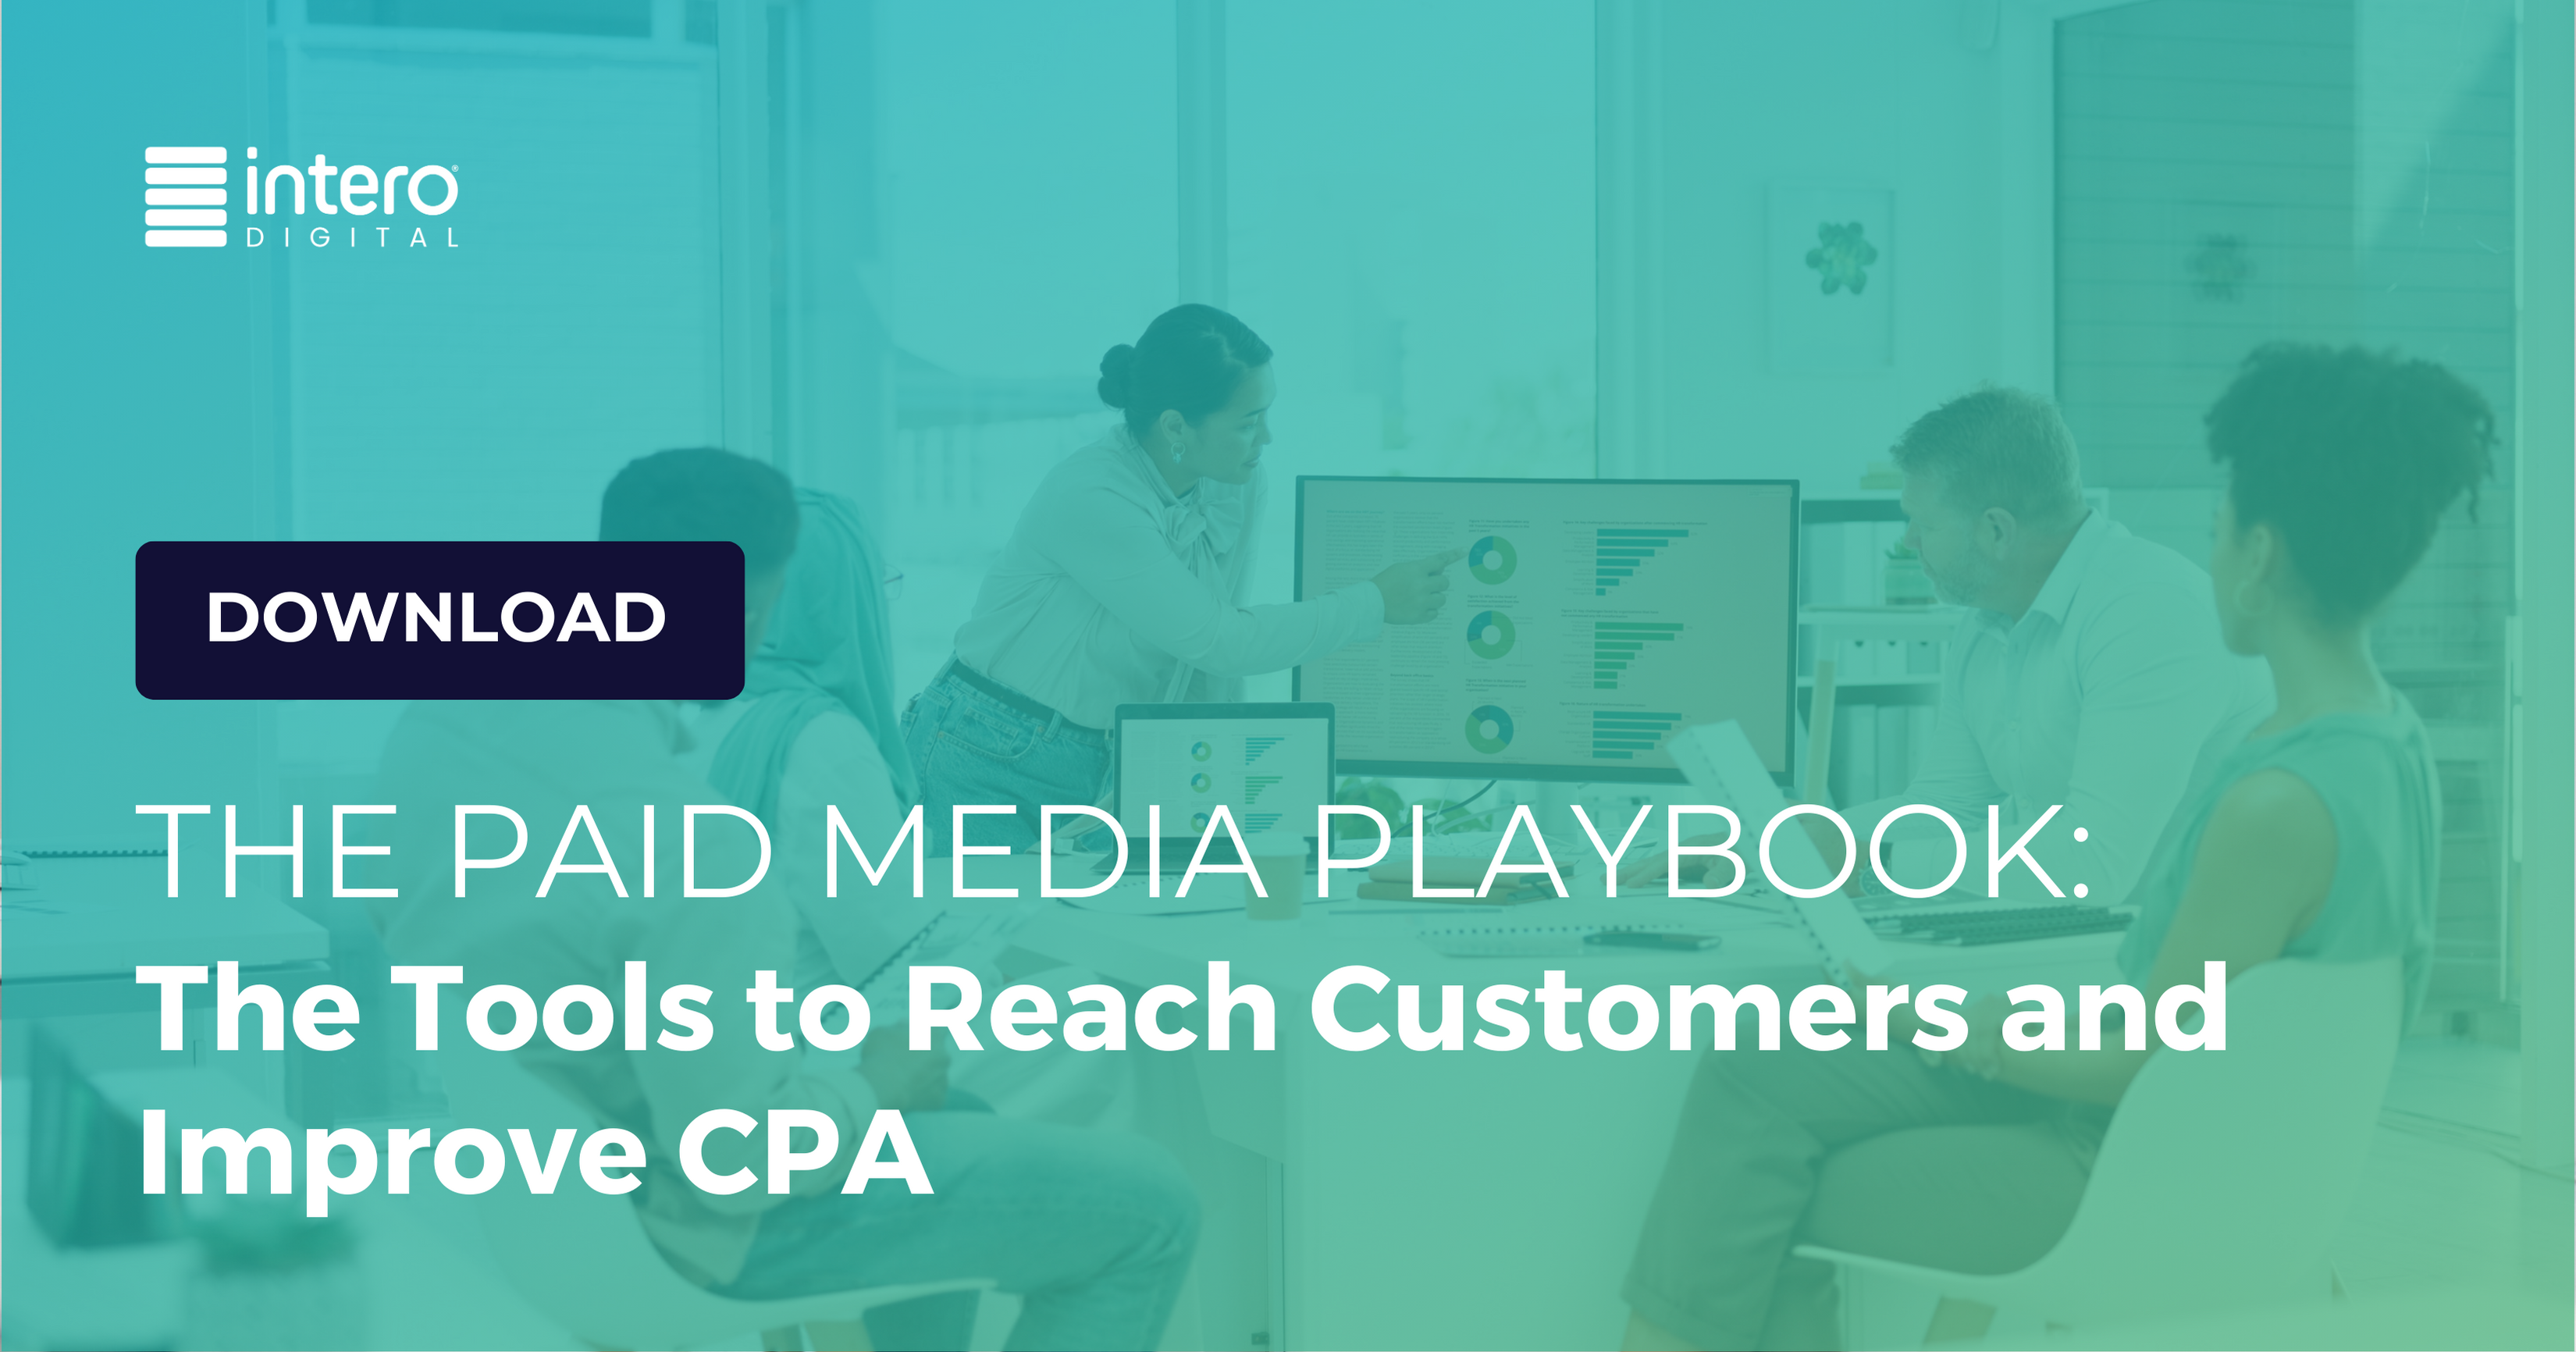 Download: The Paid Media Playbook: The Tools to Reach Customers and Improve CPA